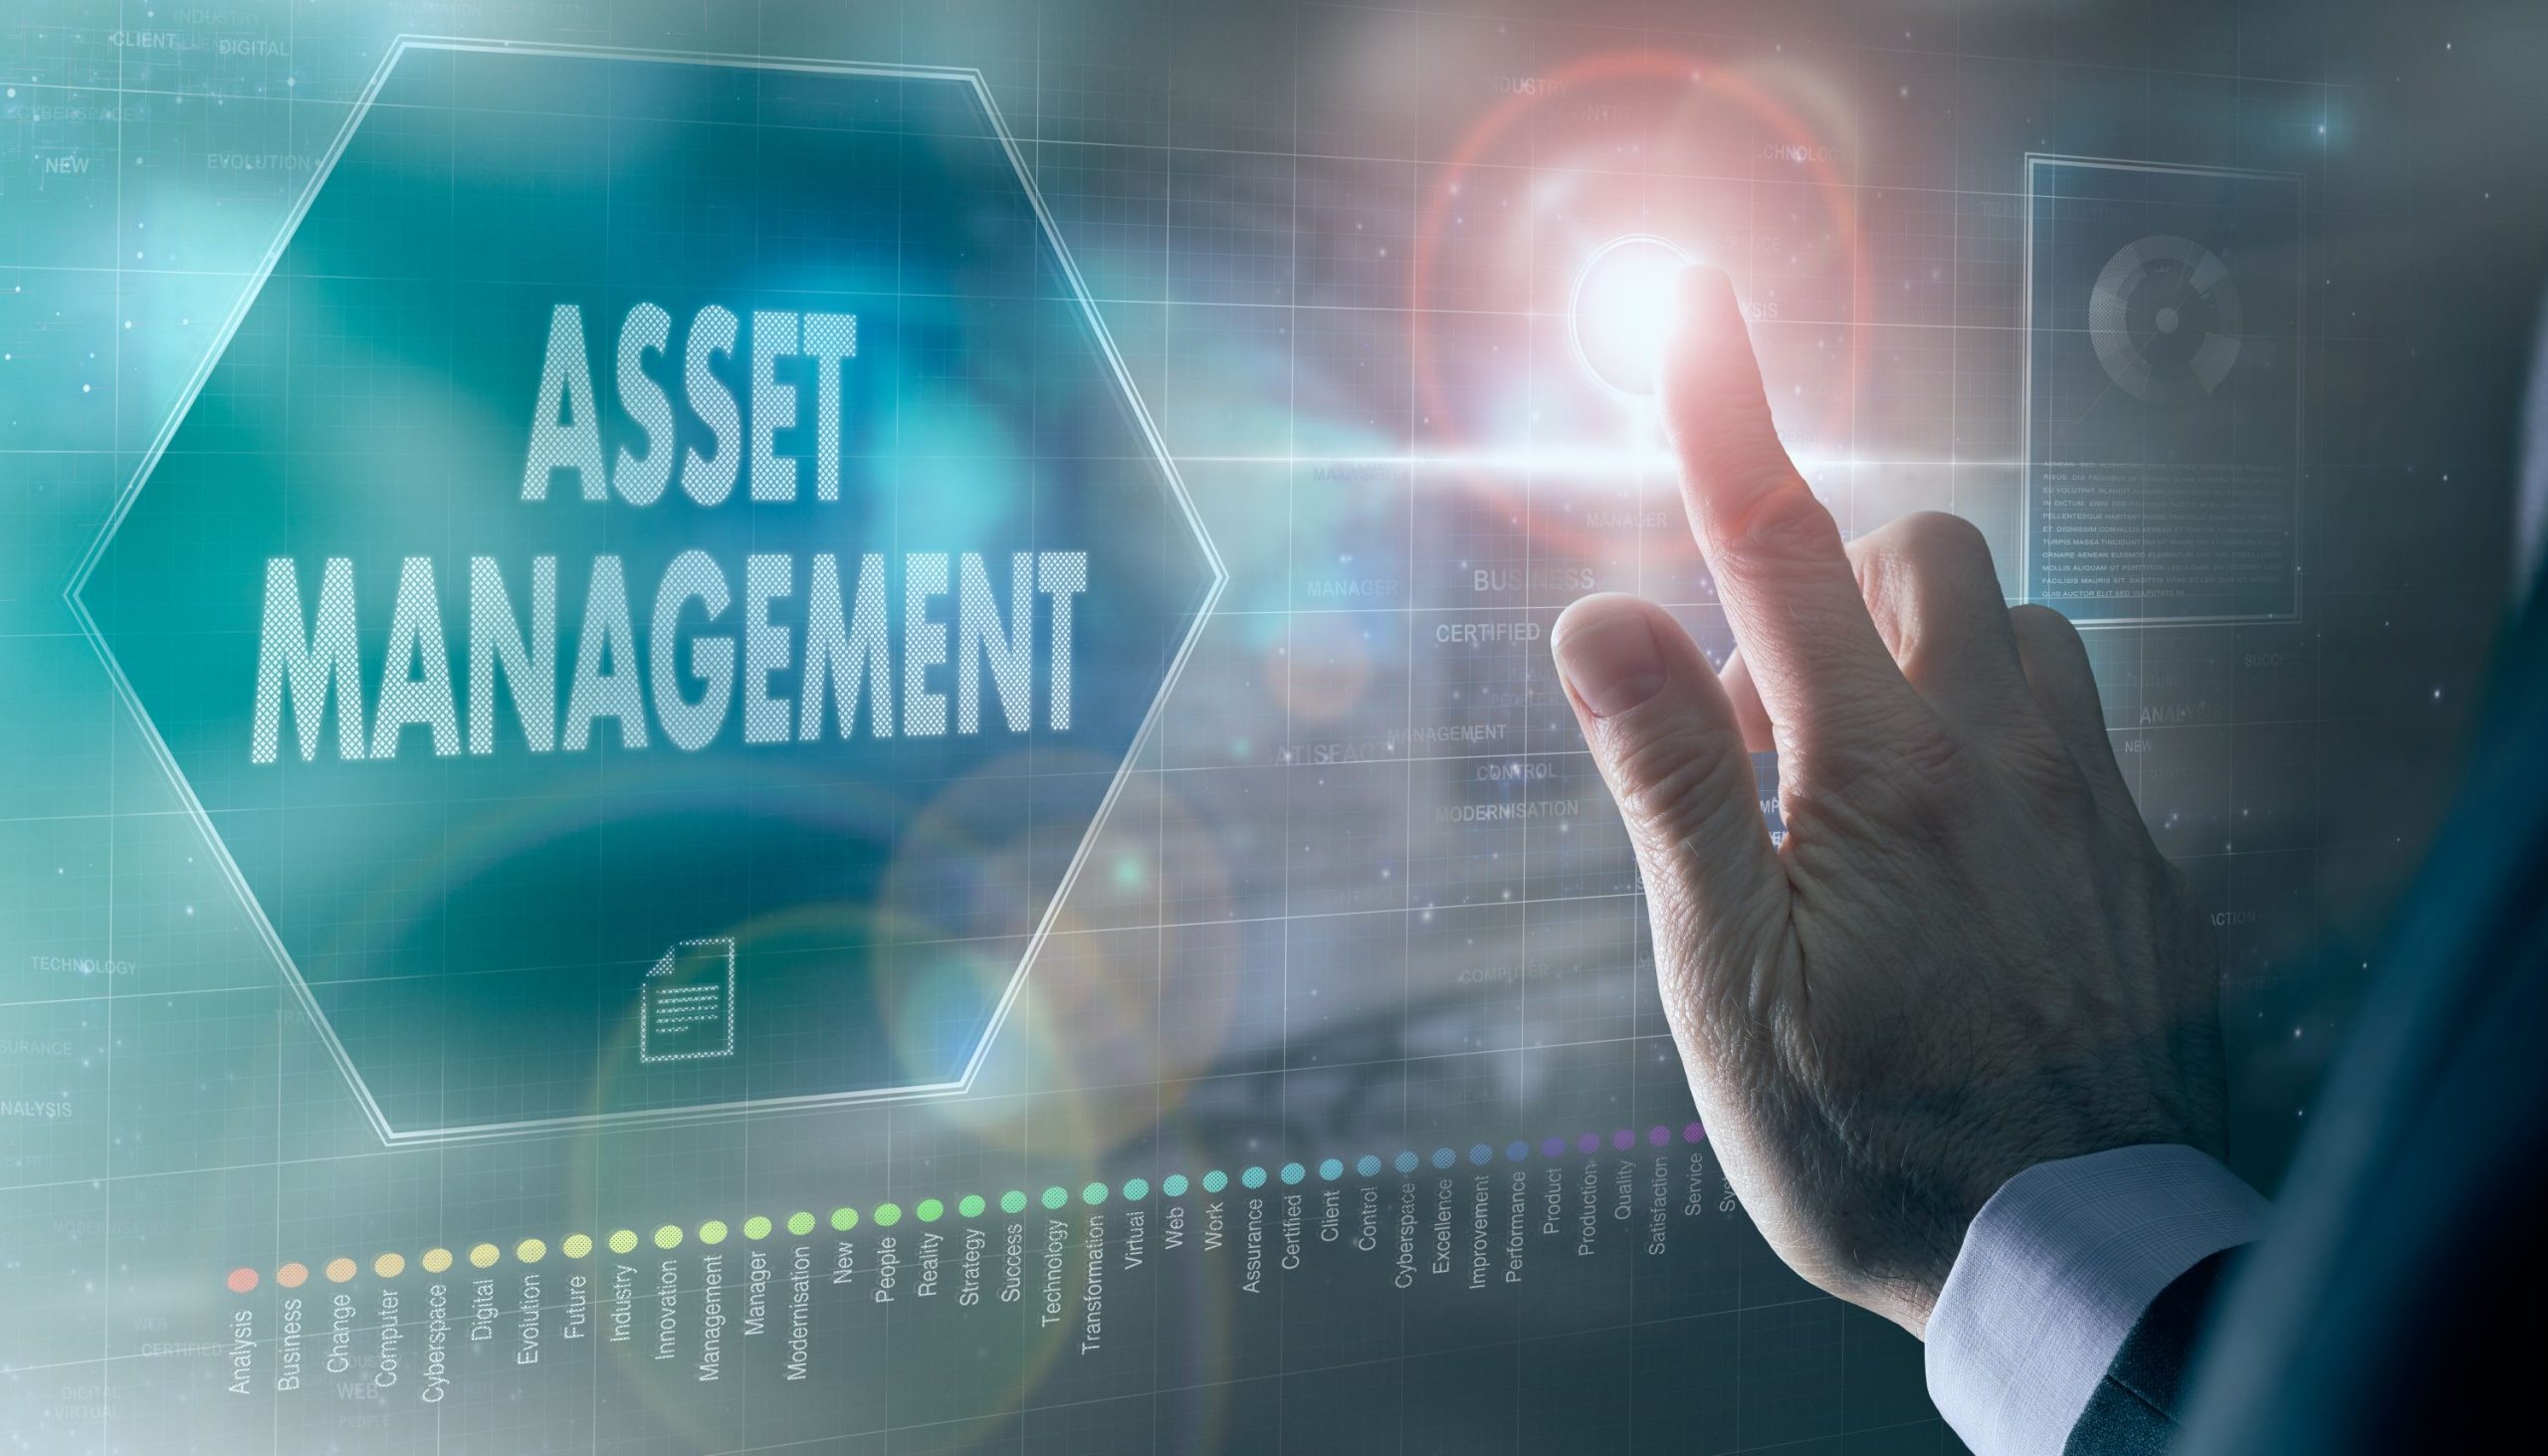 What Are the 4 Key Stages of Asset Management Lifecycle?